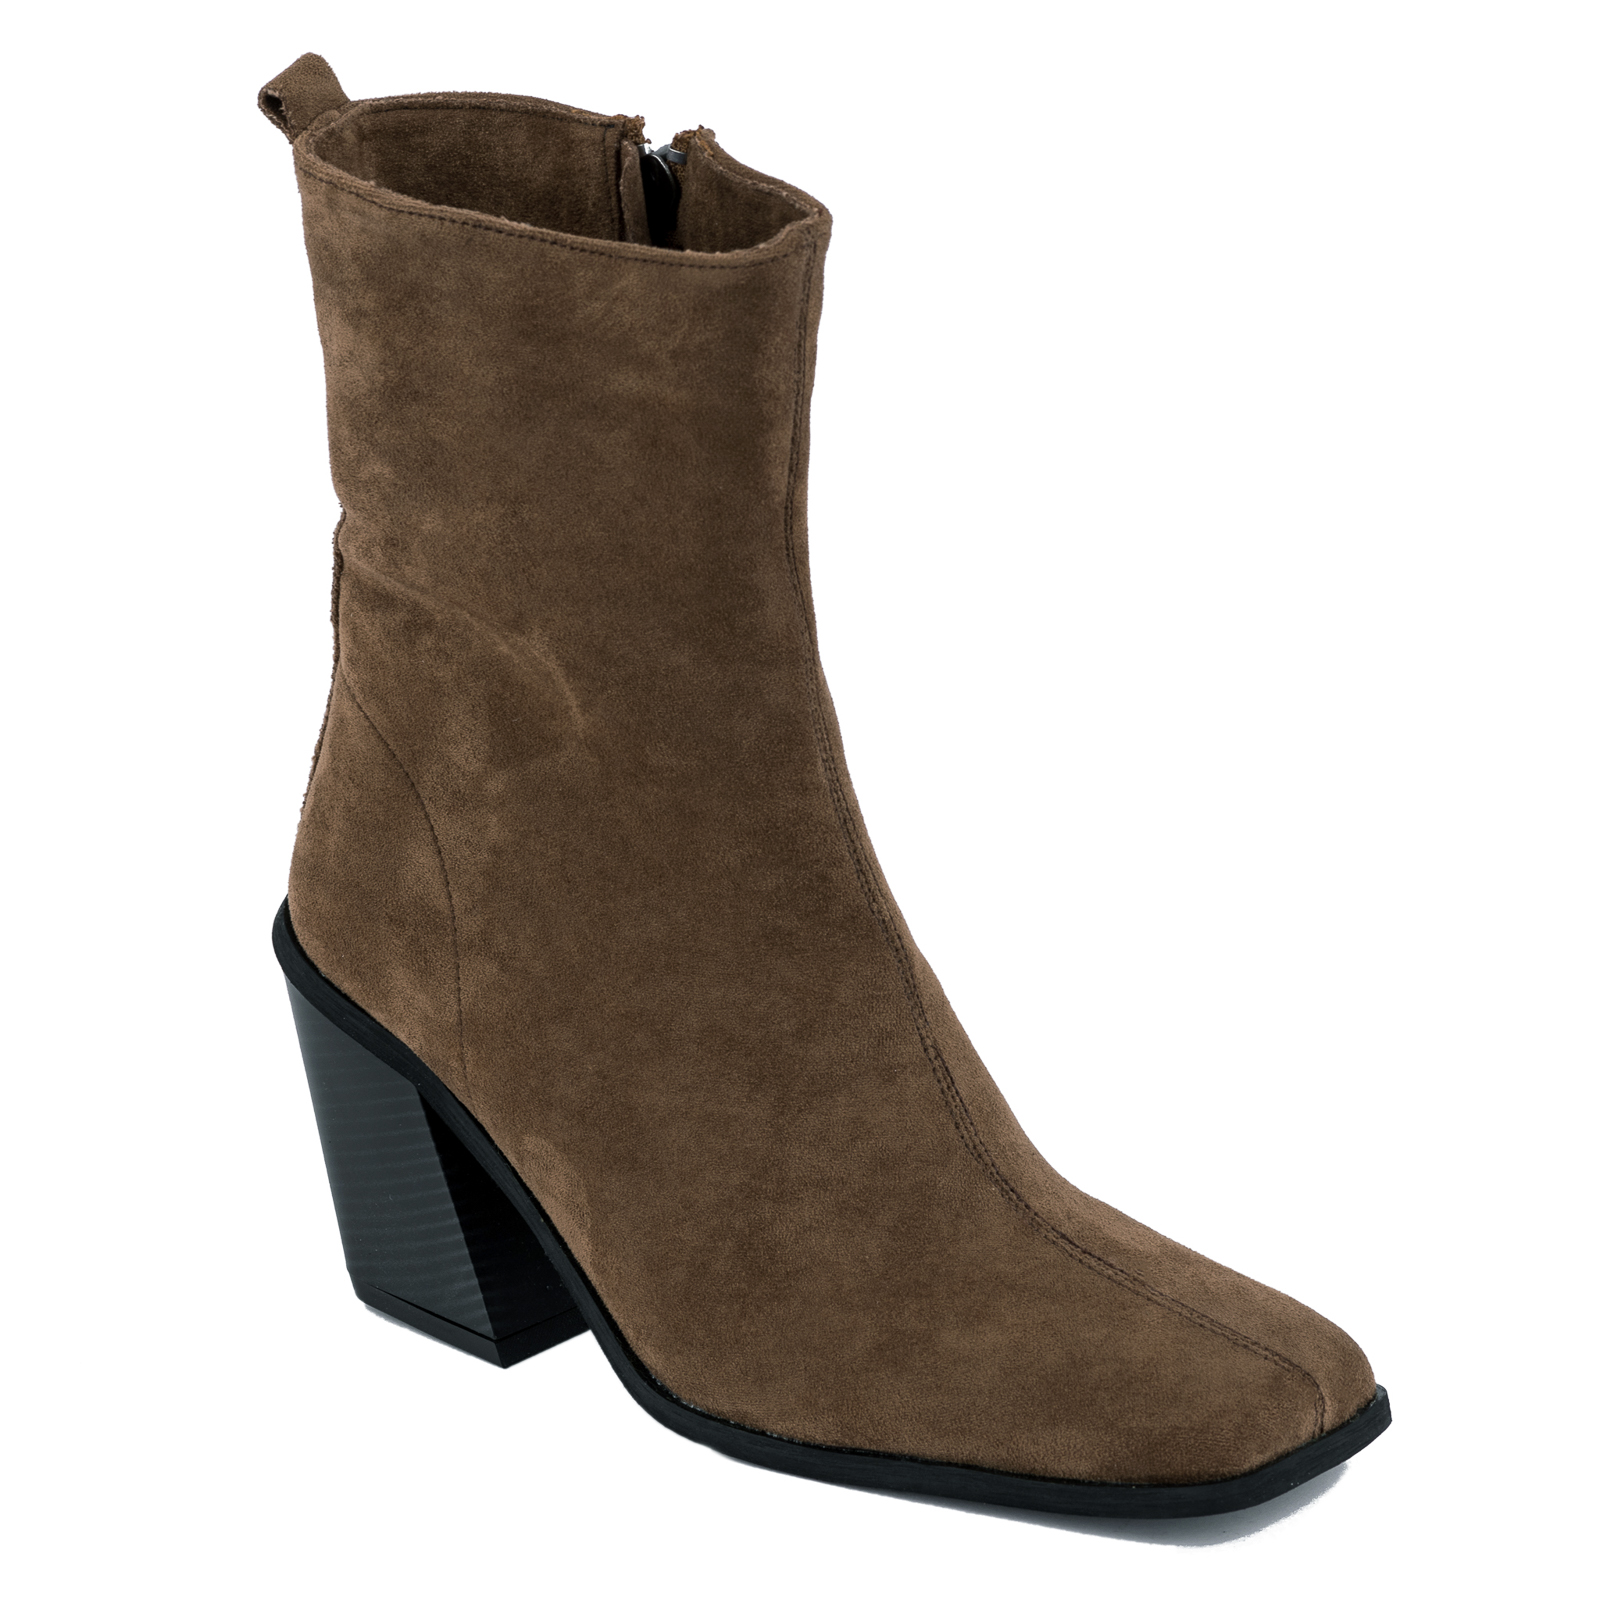 VELOUR ANKLE BOOTS WITH BLOCK HEEL - BROWN